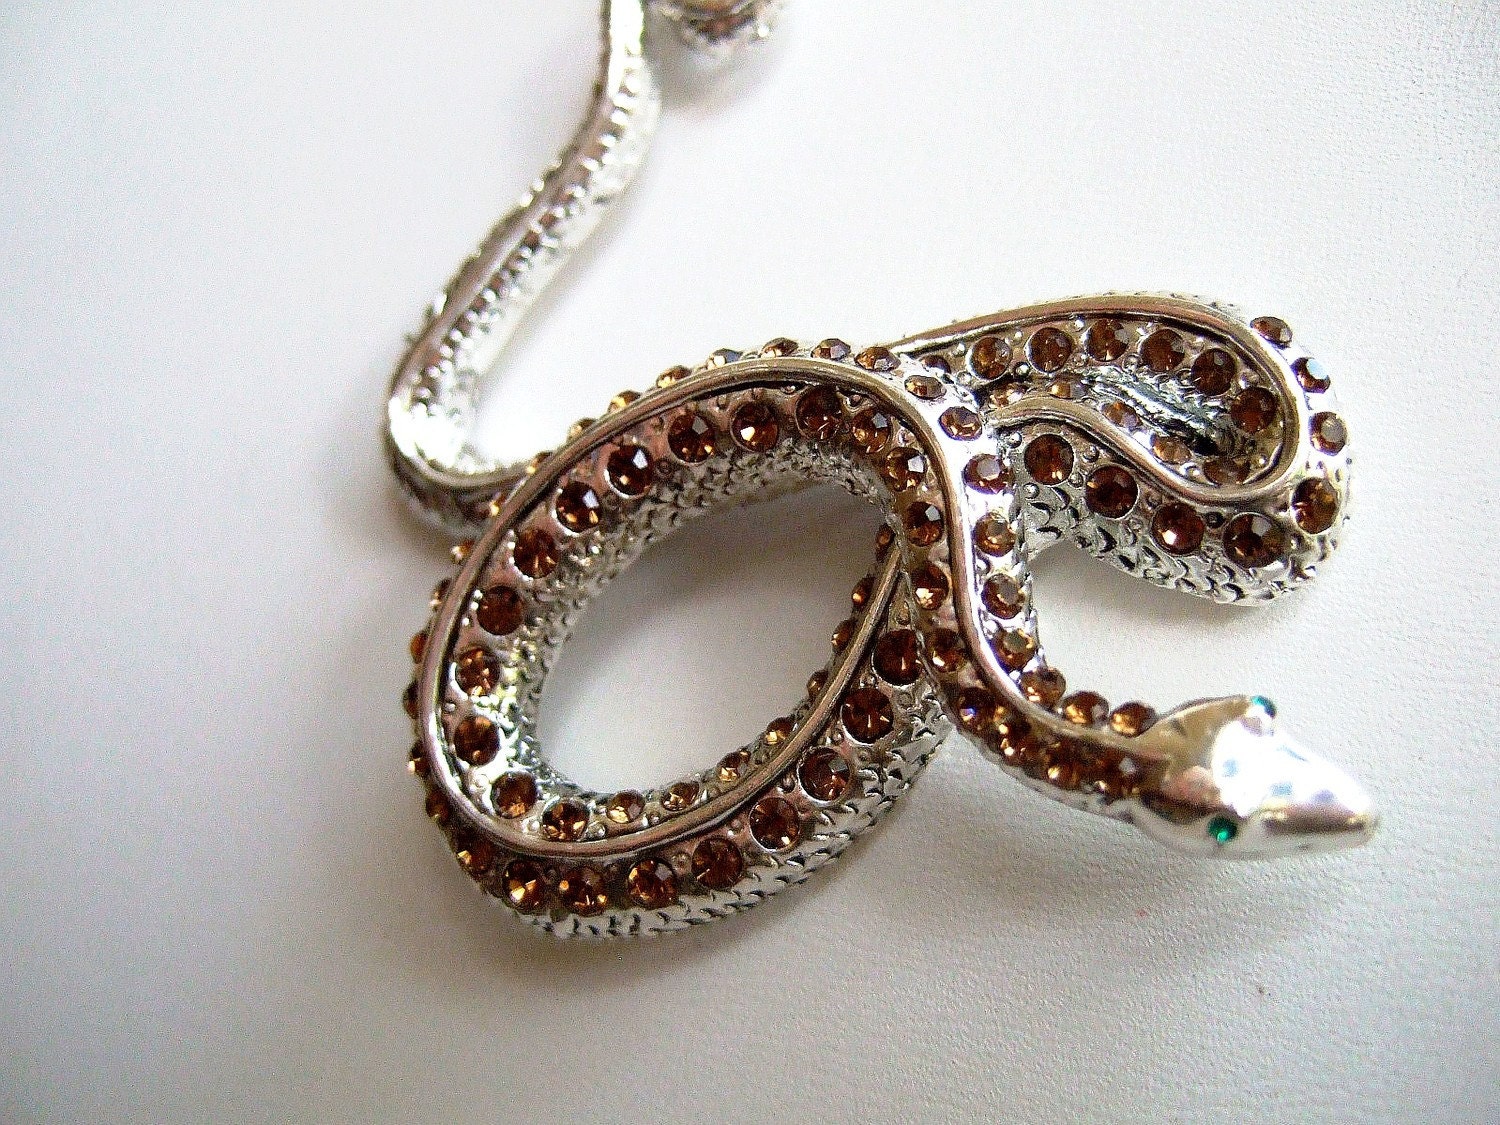 Coiled Copperhead Snake in Silver Upcycled by MOCJewelryDesign